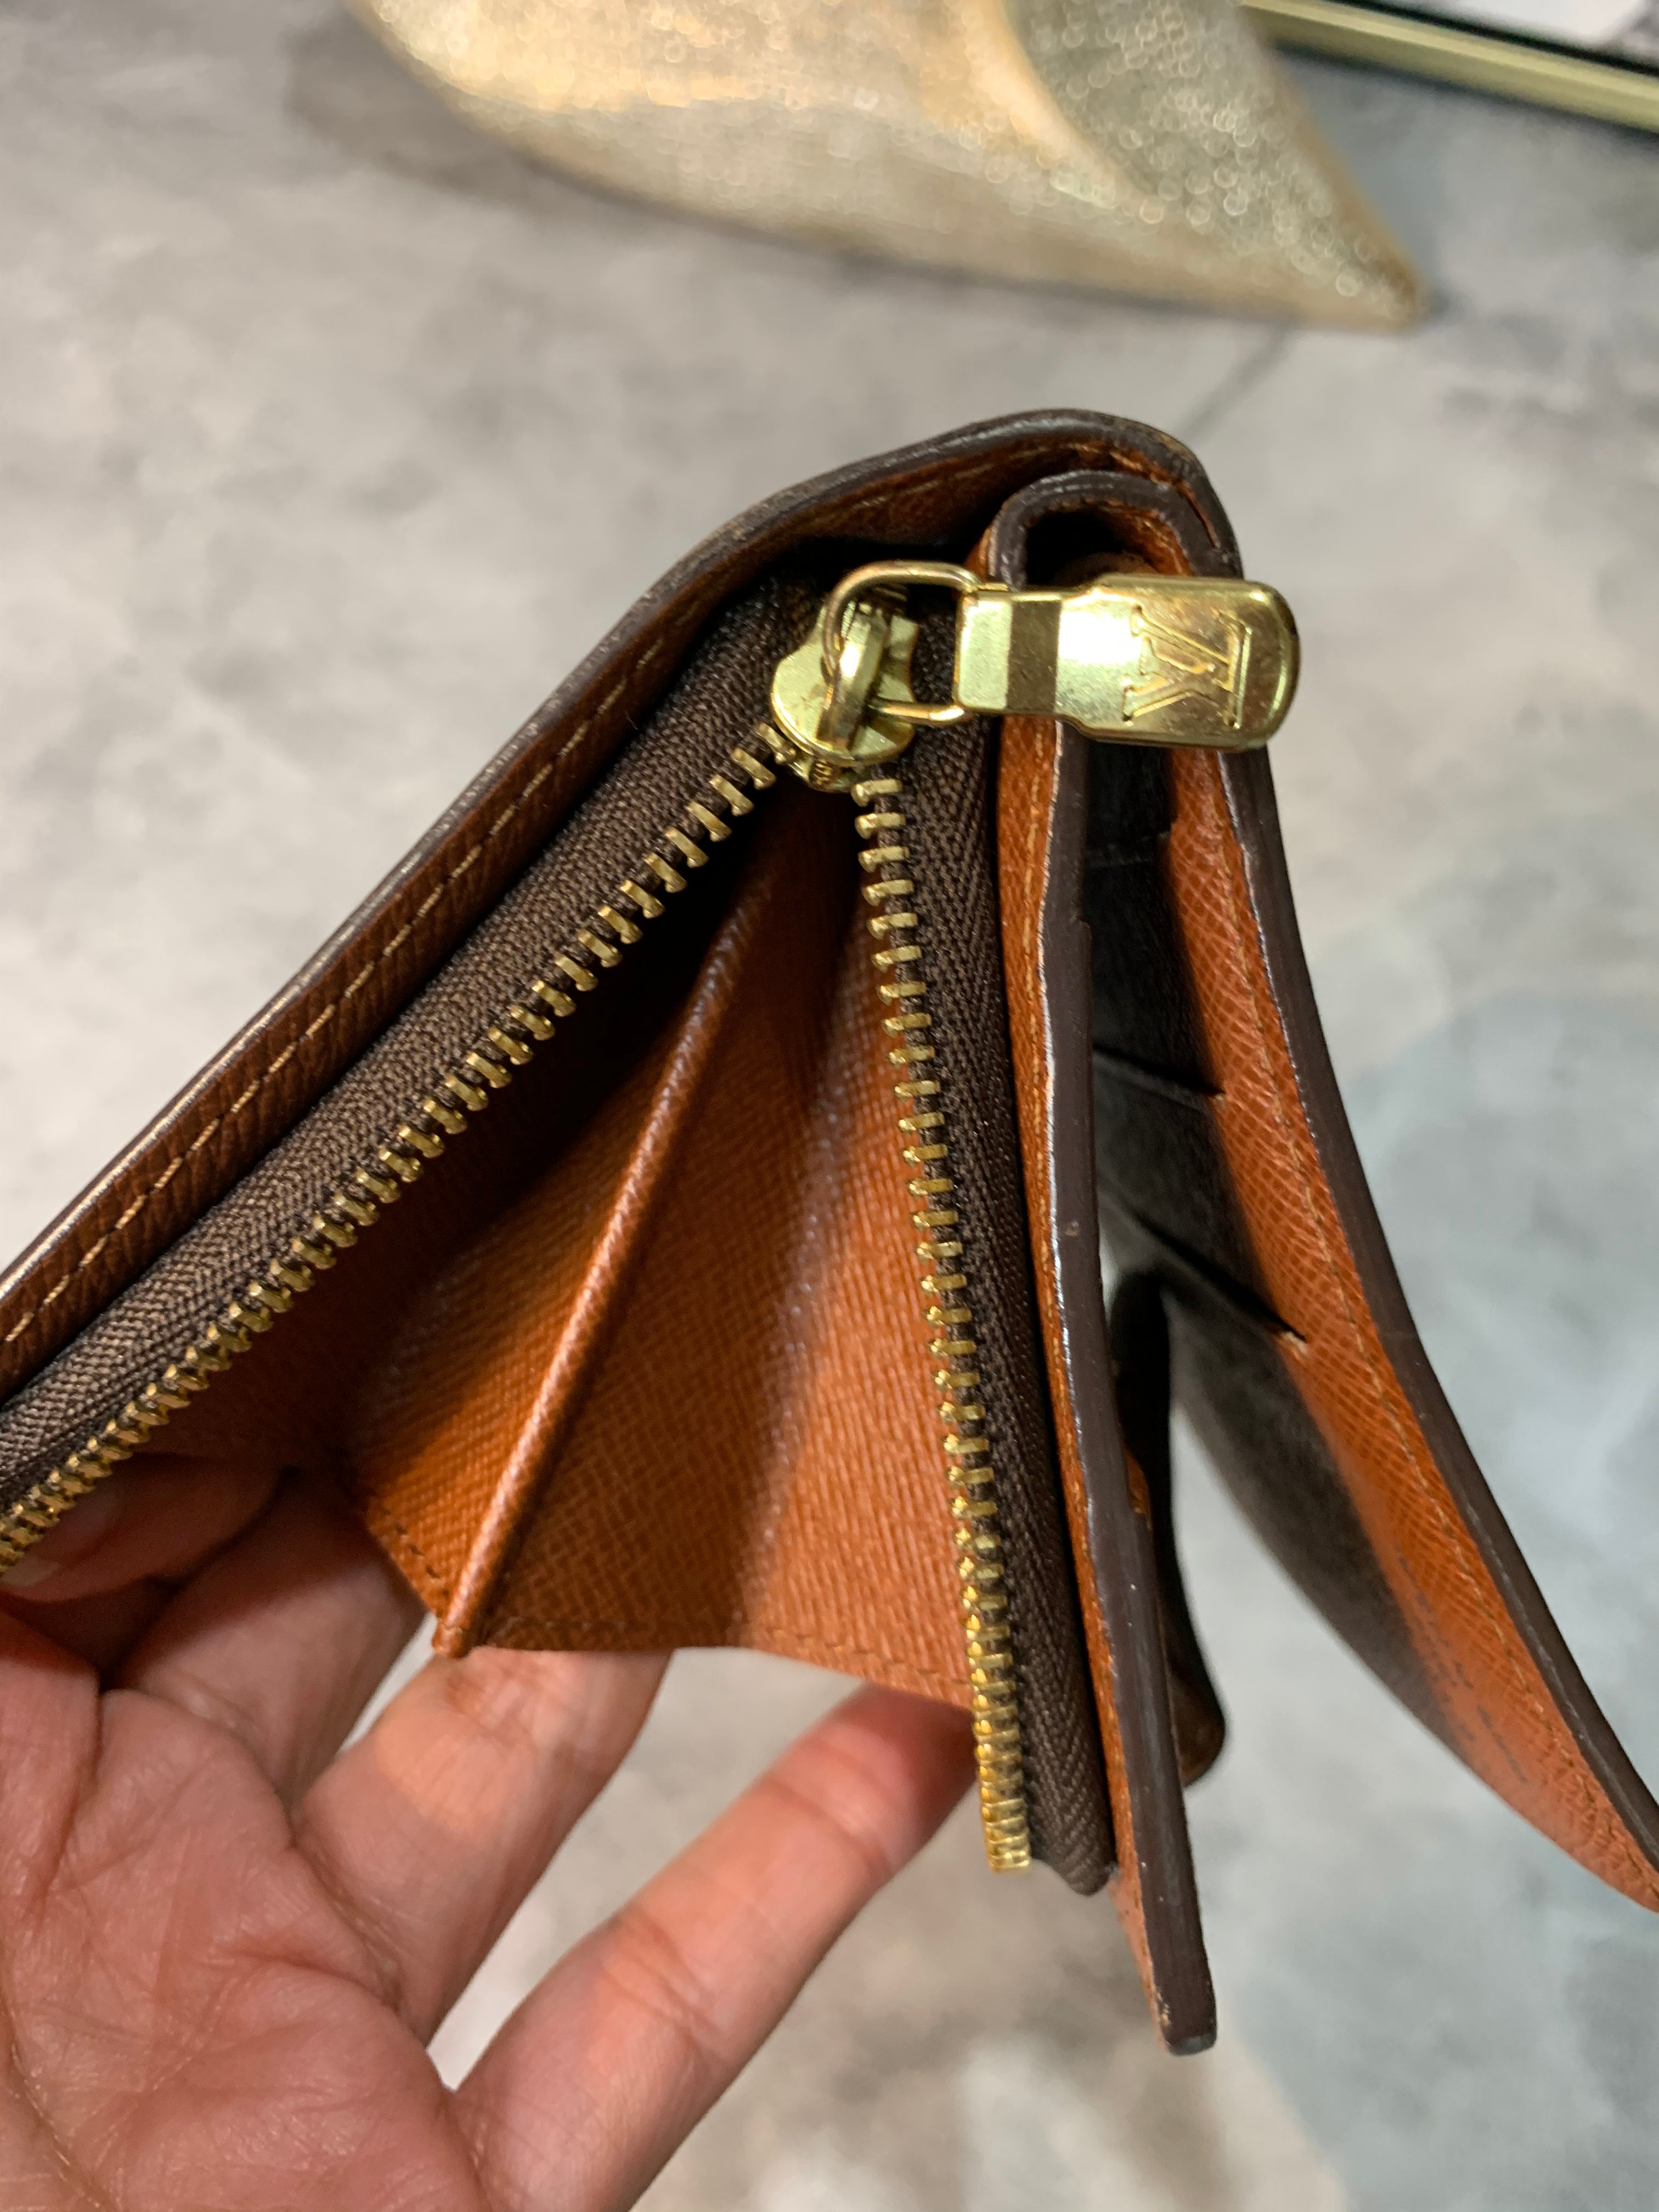 lv compact wallet